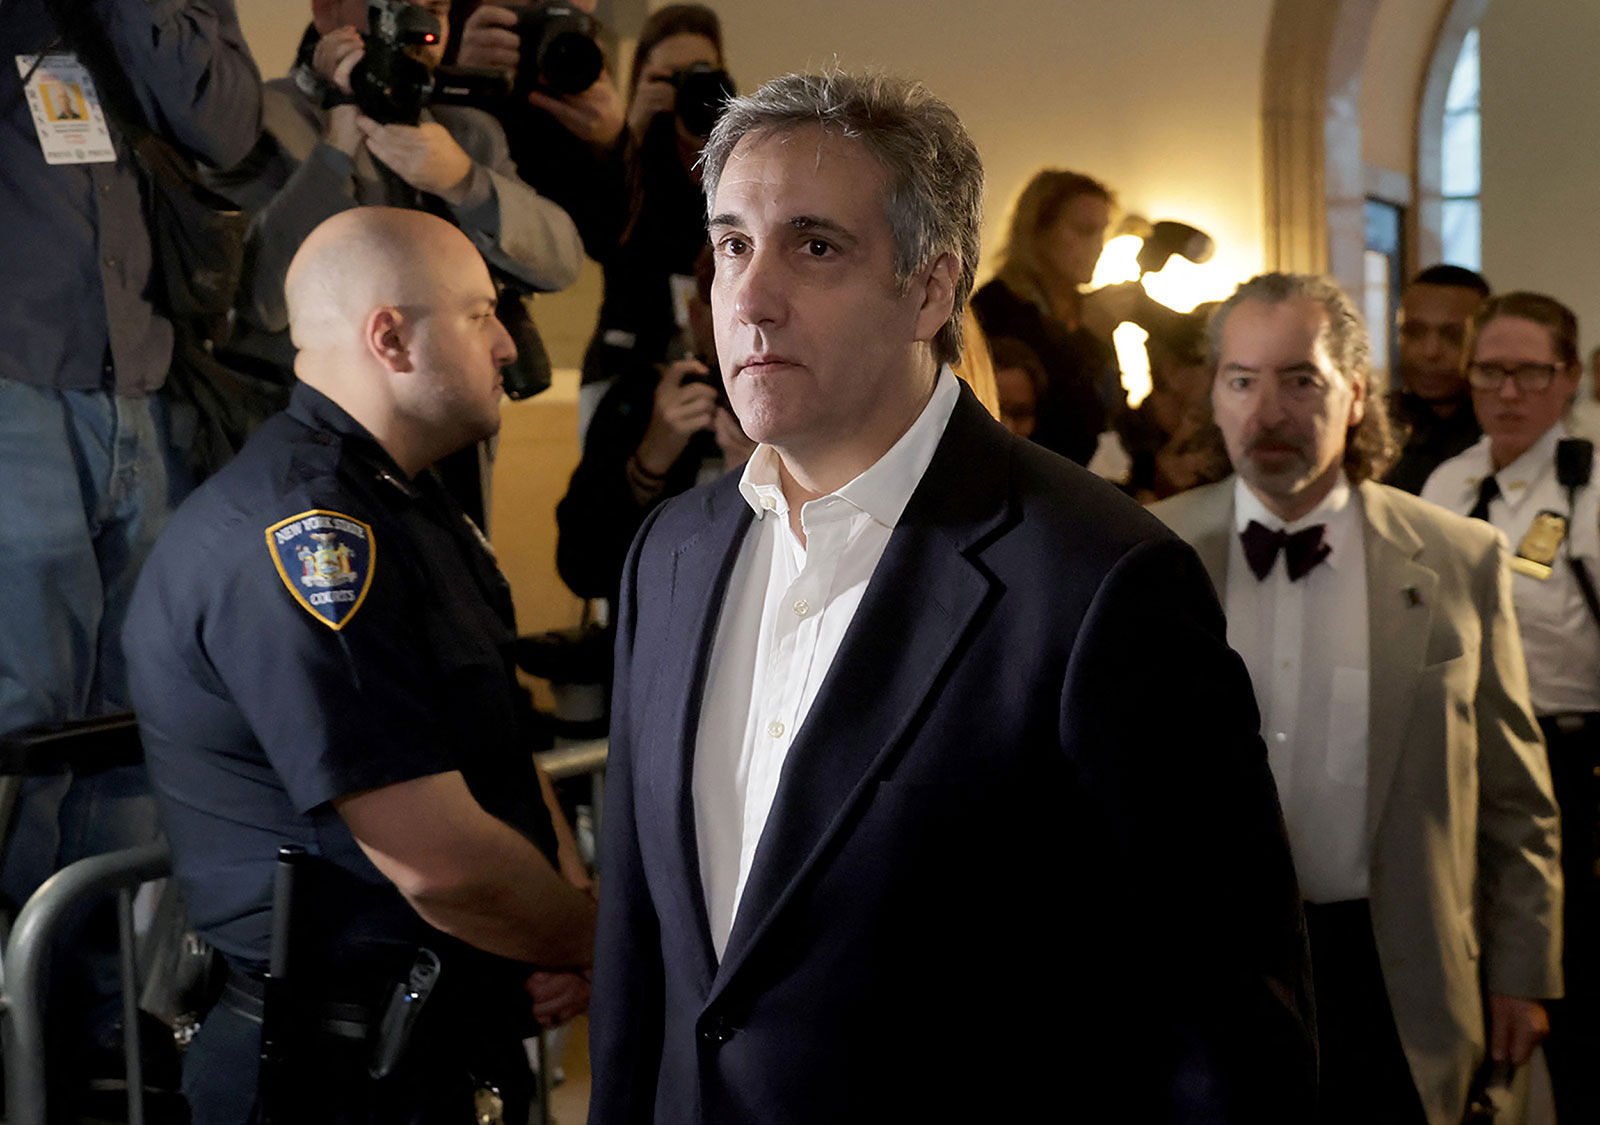 Michael Cohen arrives at New York Supreme Court for former President Donald Trump’s civil business fraud trial on Wednesday.